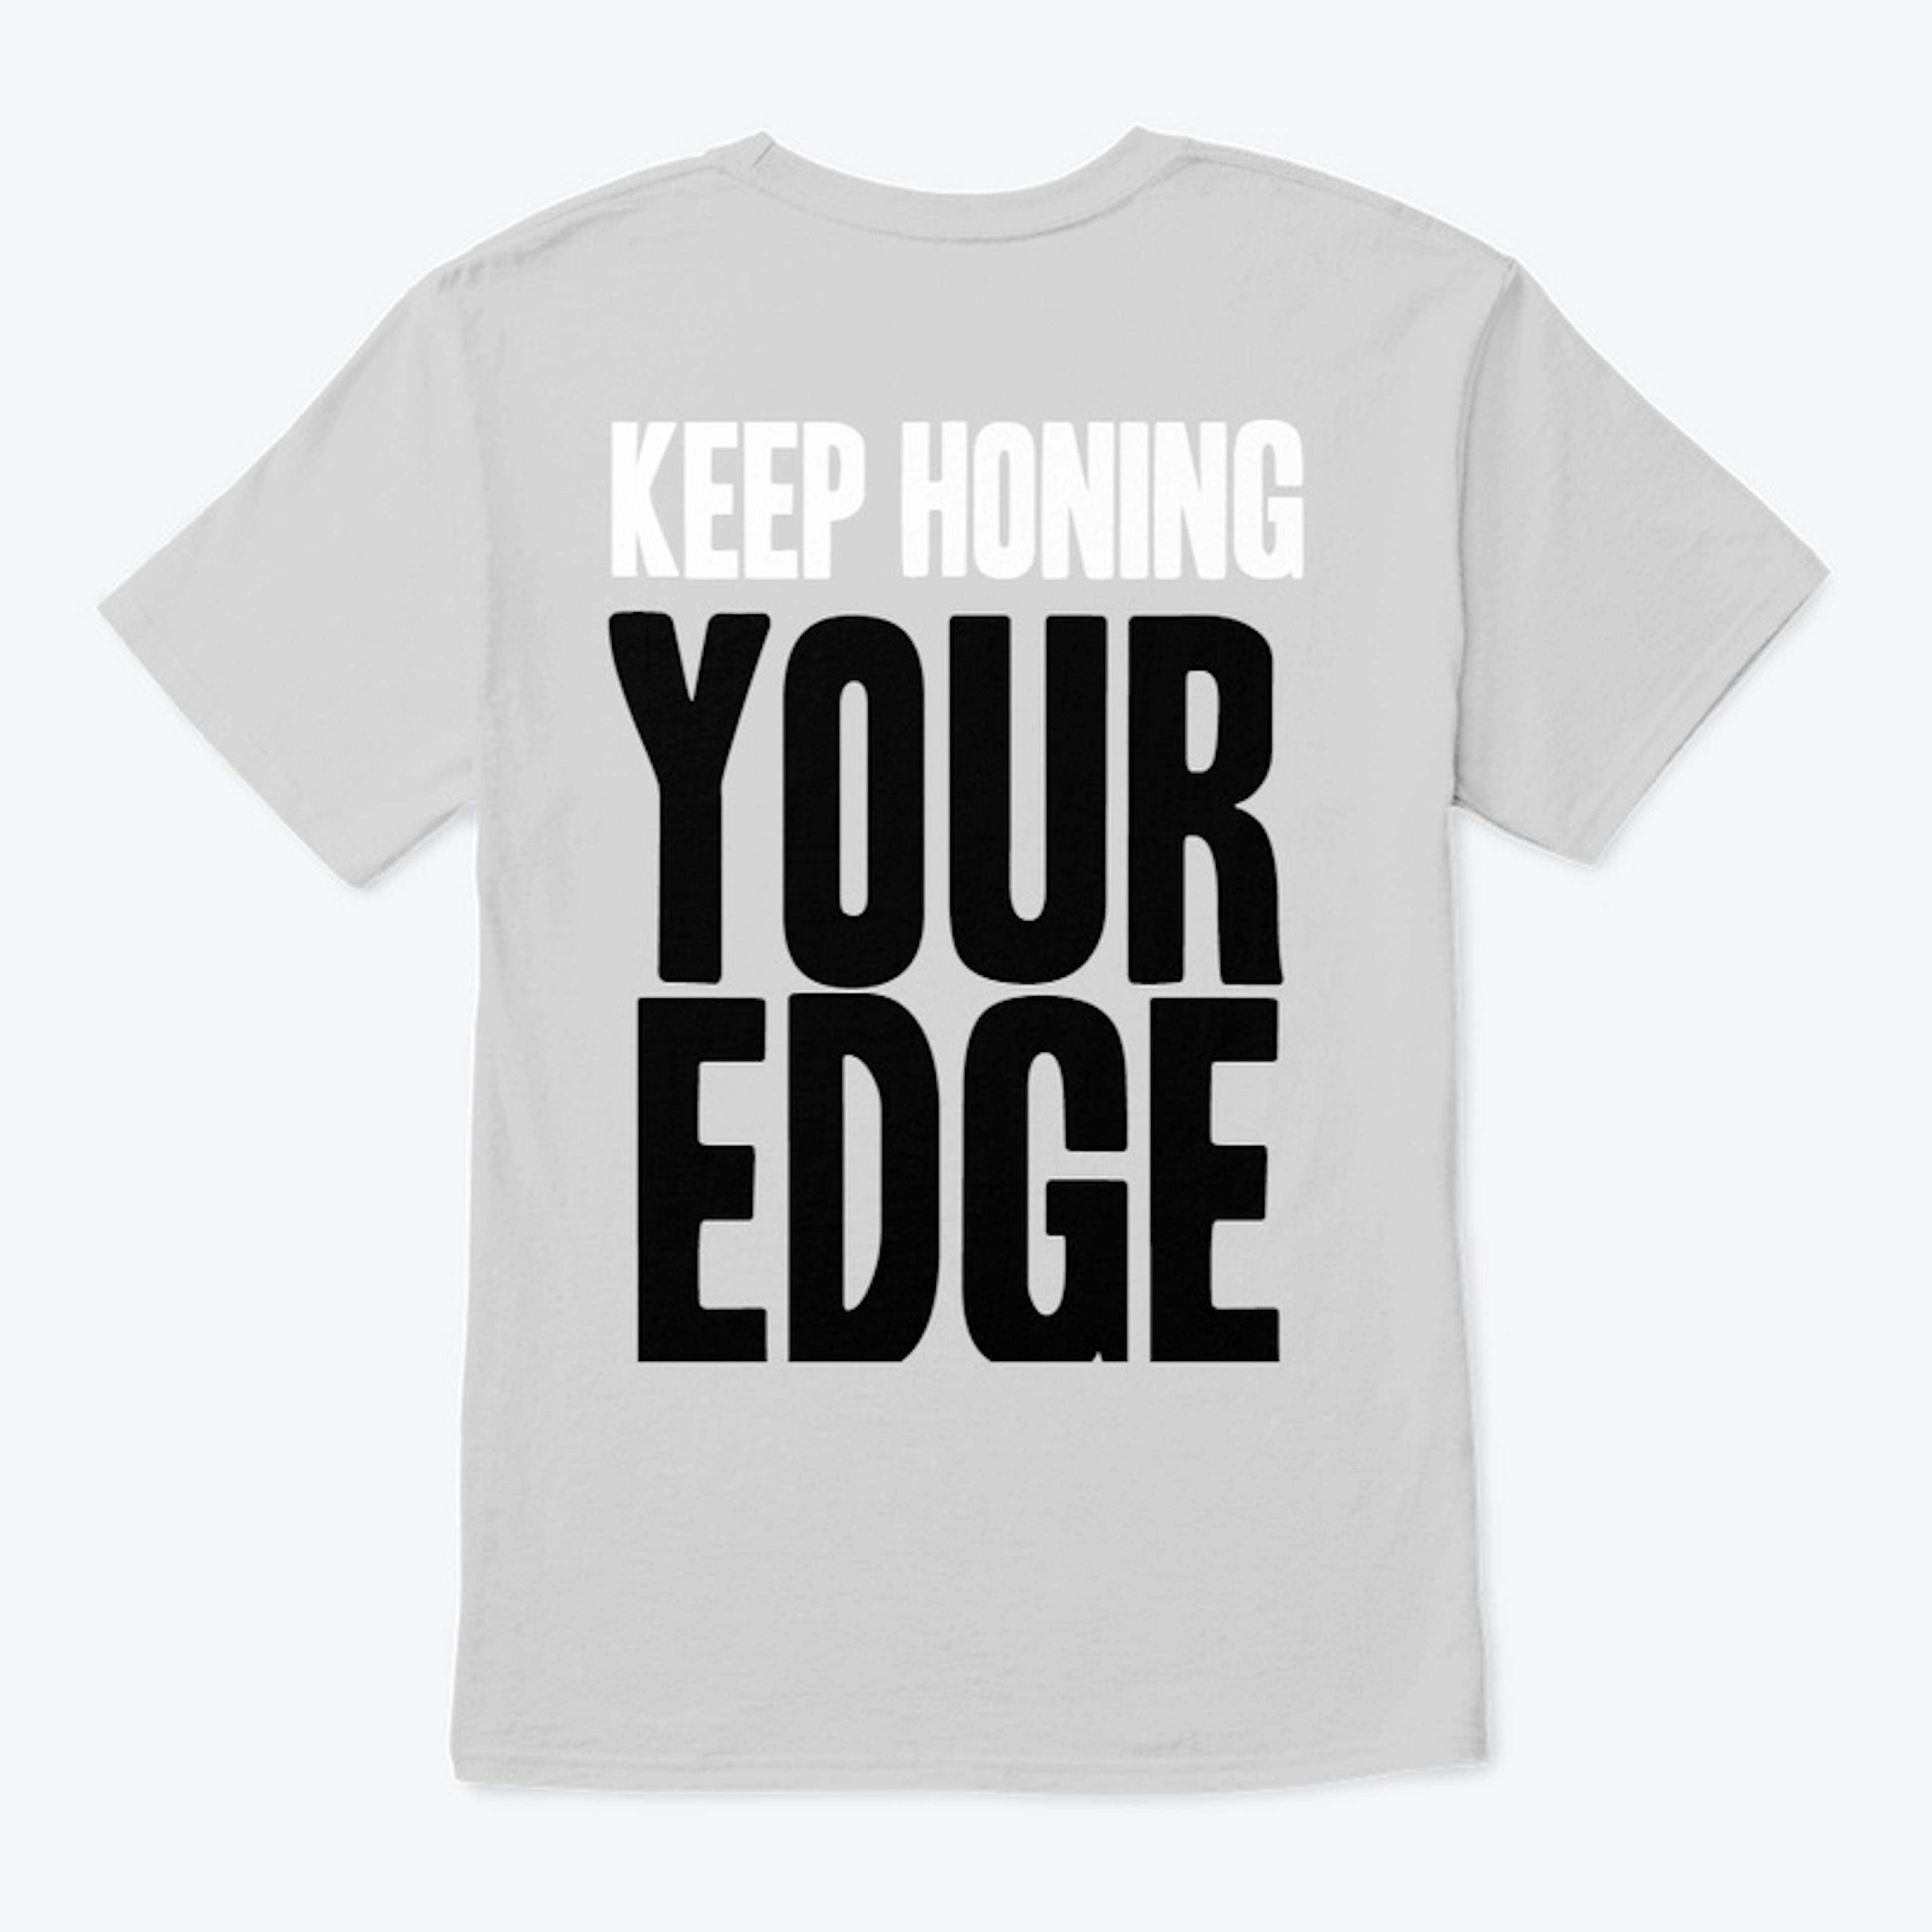 Keep Honing Your Edge